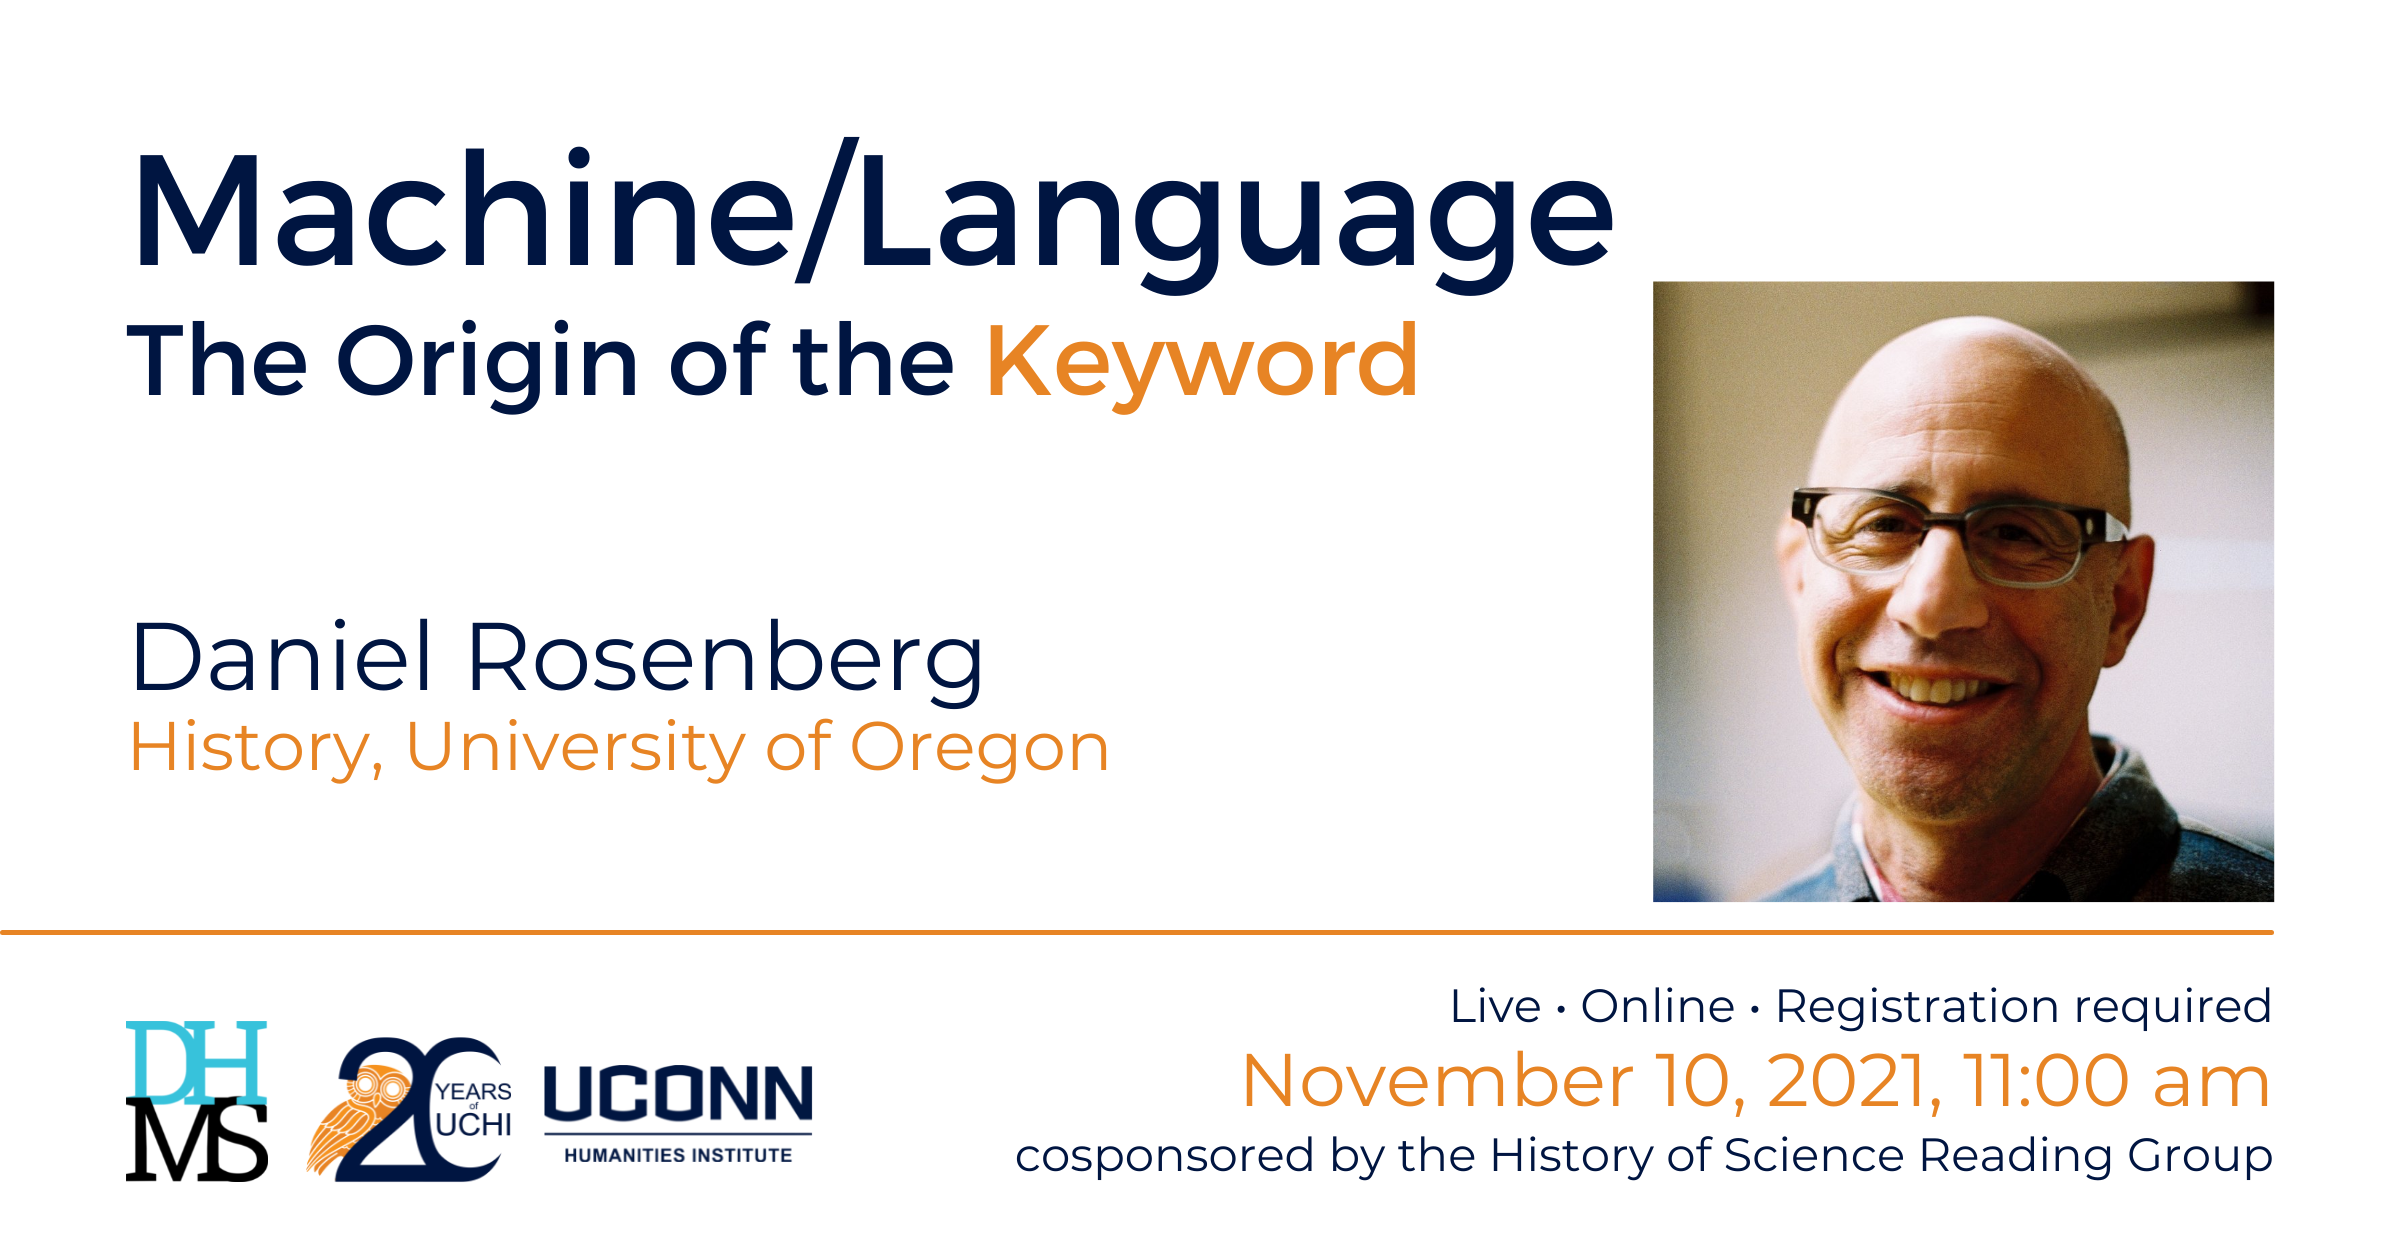 DHMS: Machine/Language: The Origin of the Keyword. Daniel Rosenberg, History, University of Oregon. Live. Online. Registration required. November 10, 2021, 11:00am. Cosponsored by the History of Science Reading Group.